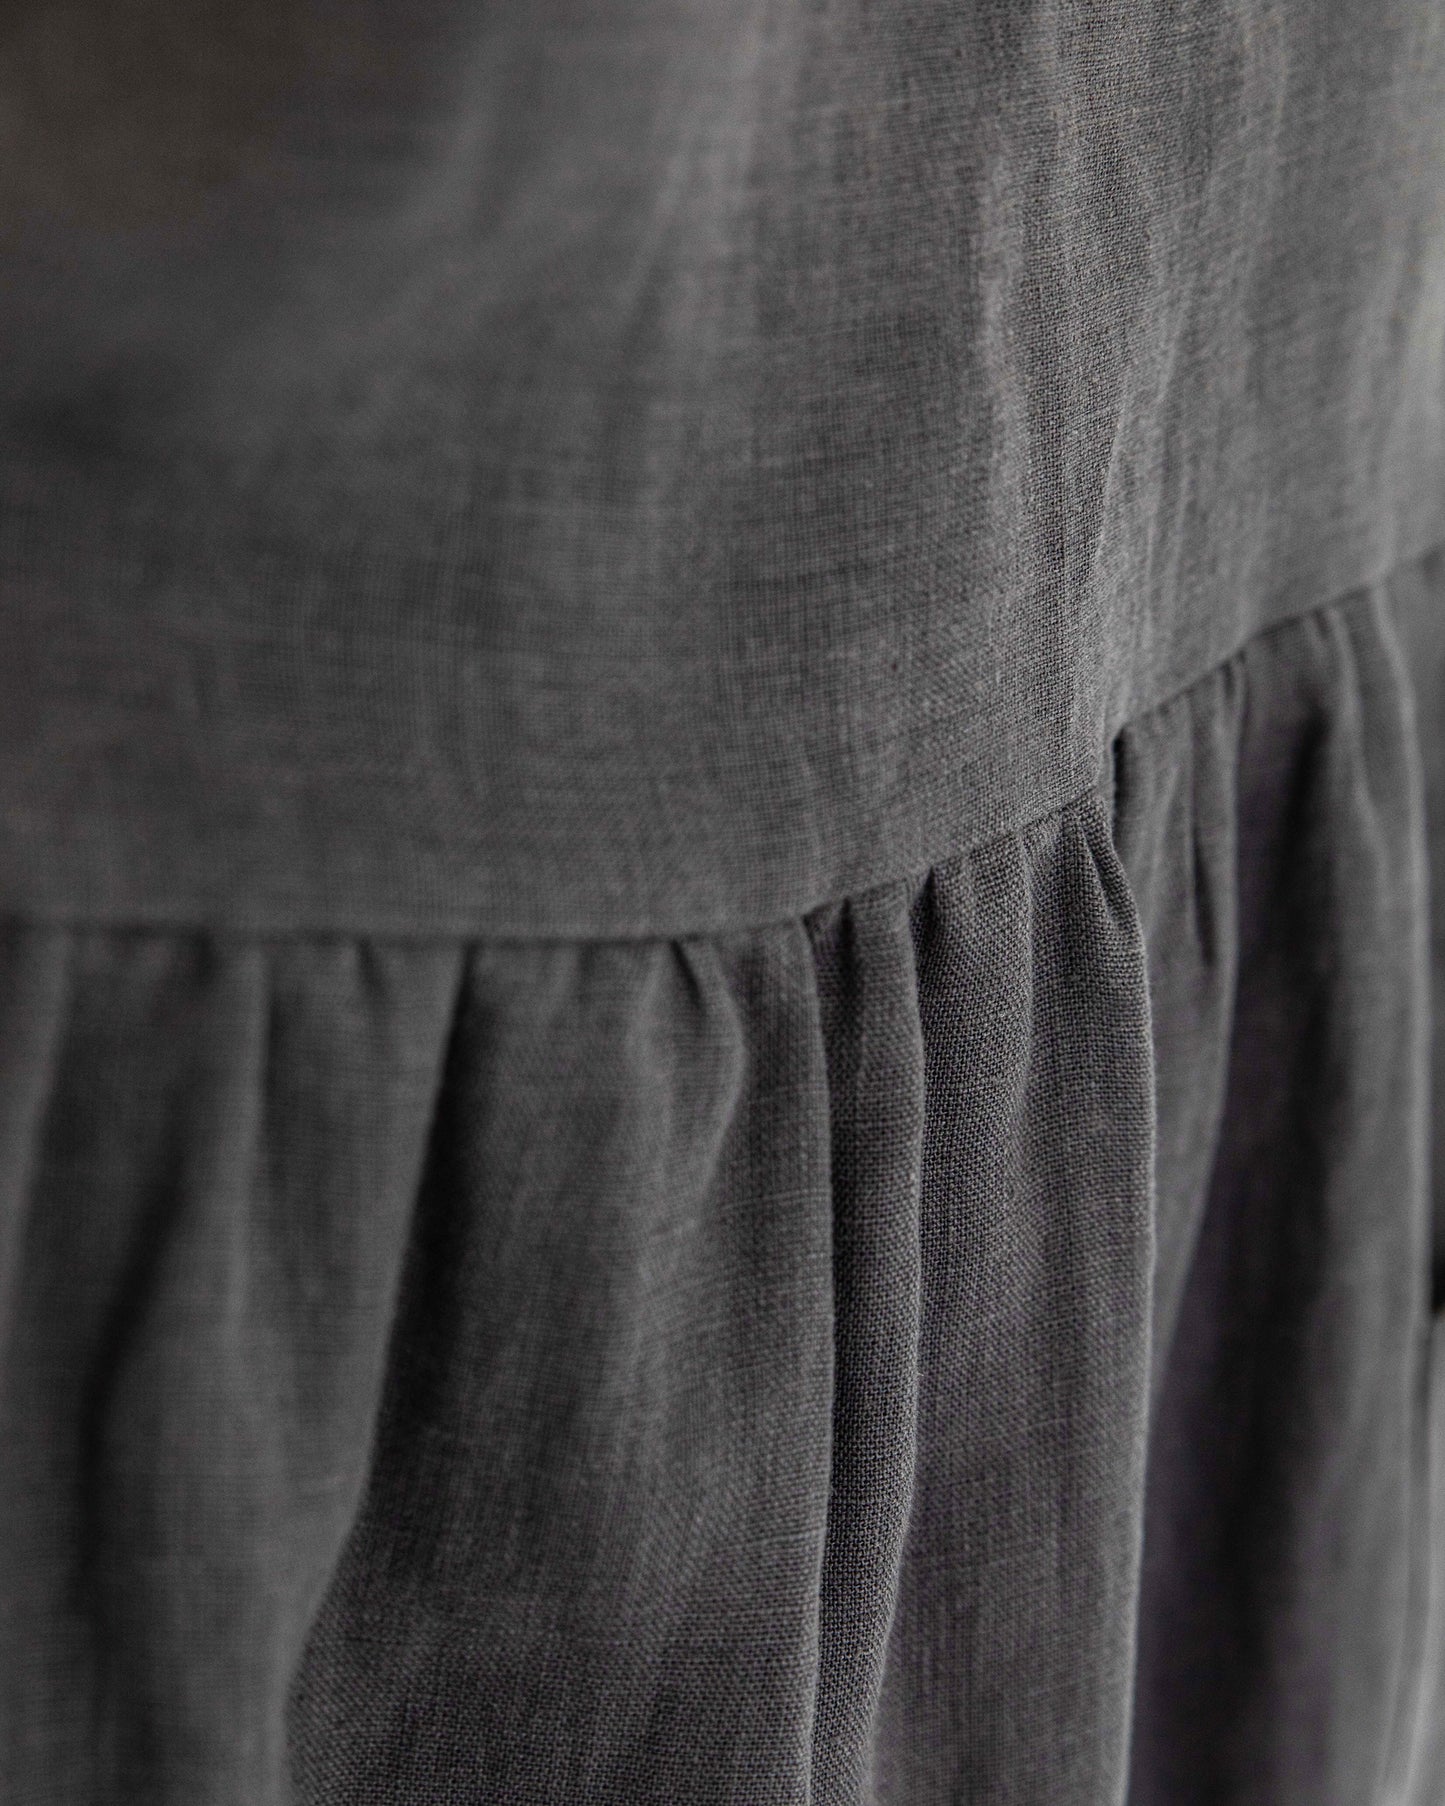 Pinafore apron dress in Charcoal gray